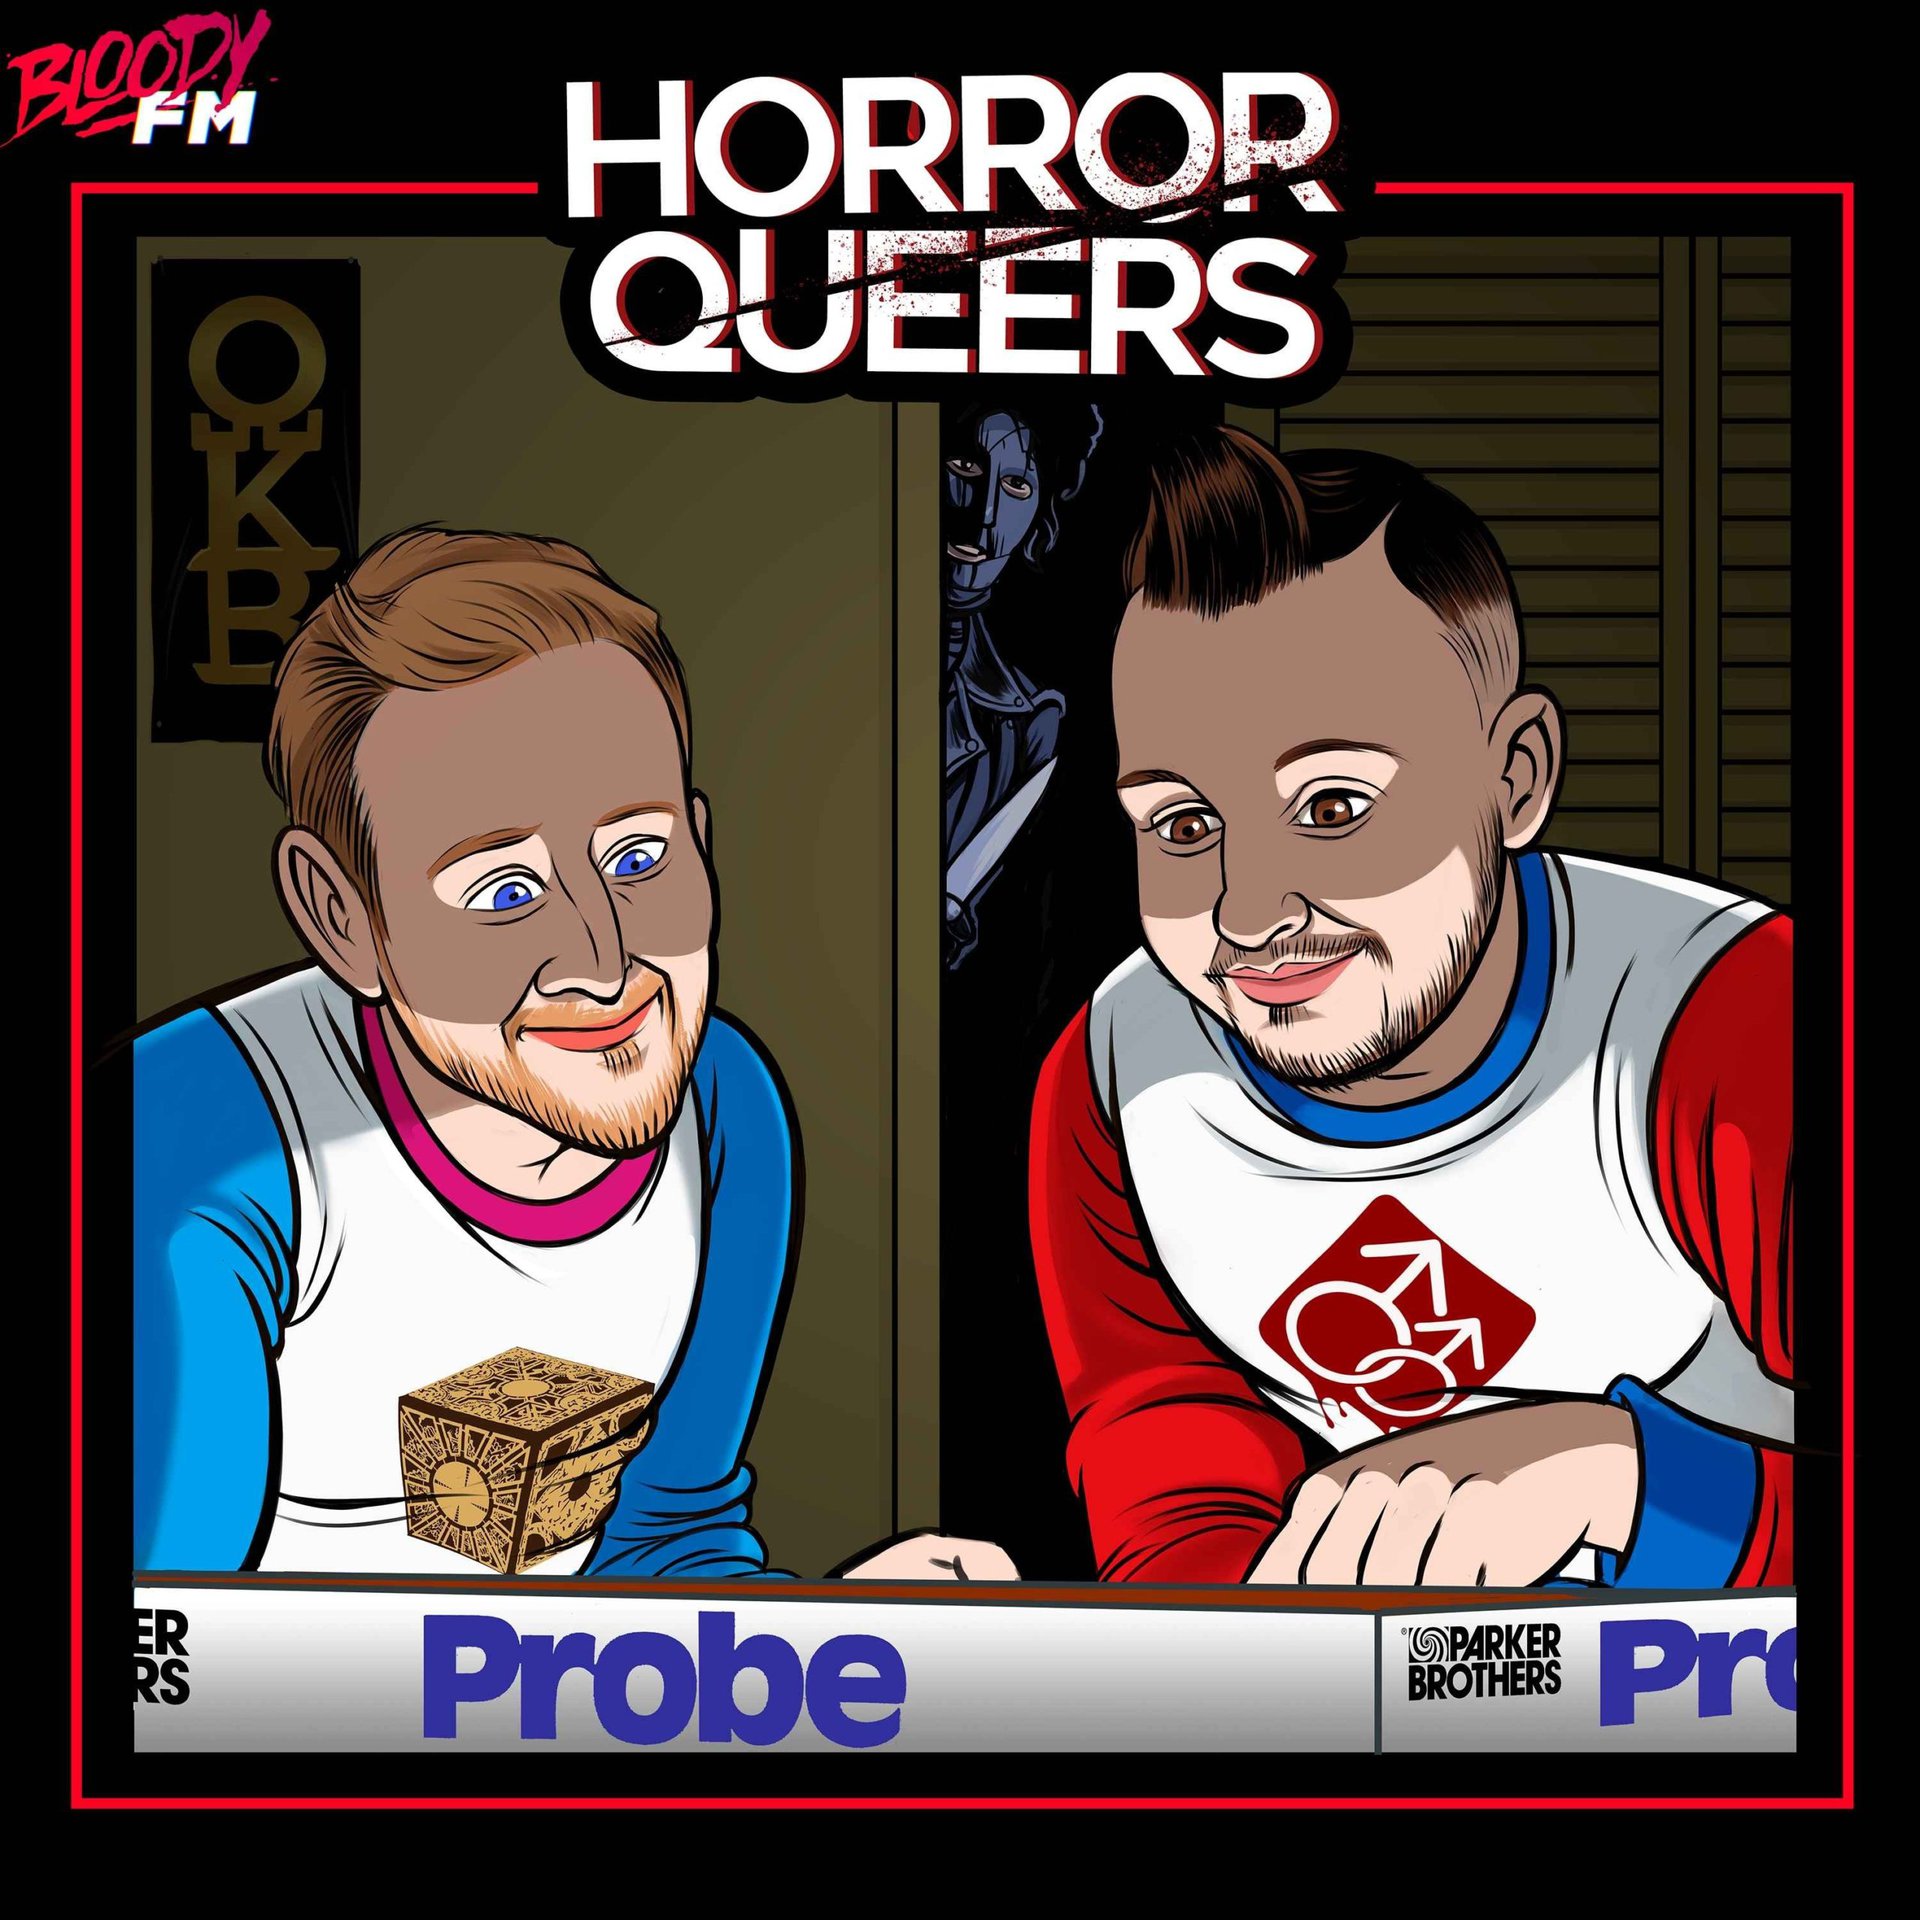 The Horror Queers podcast logo.